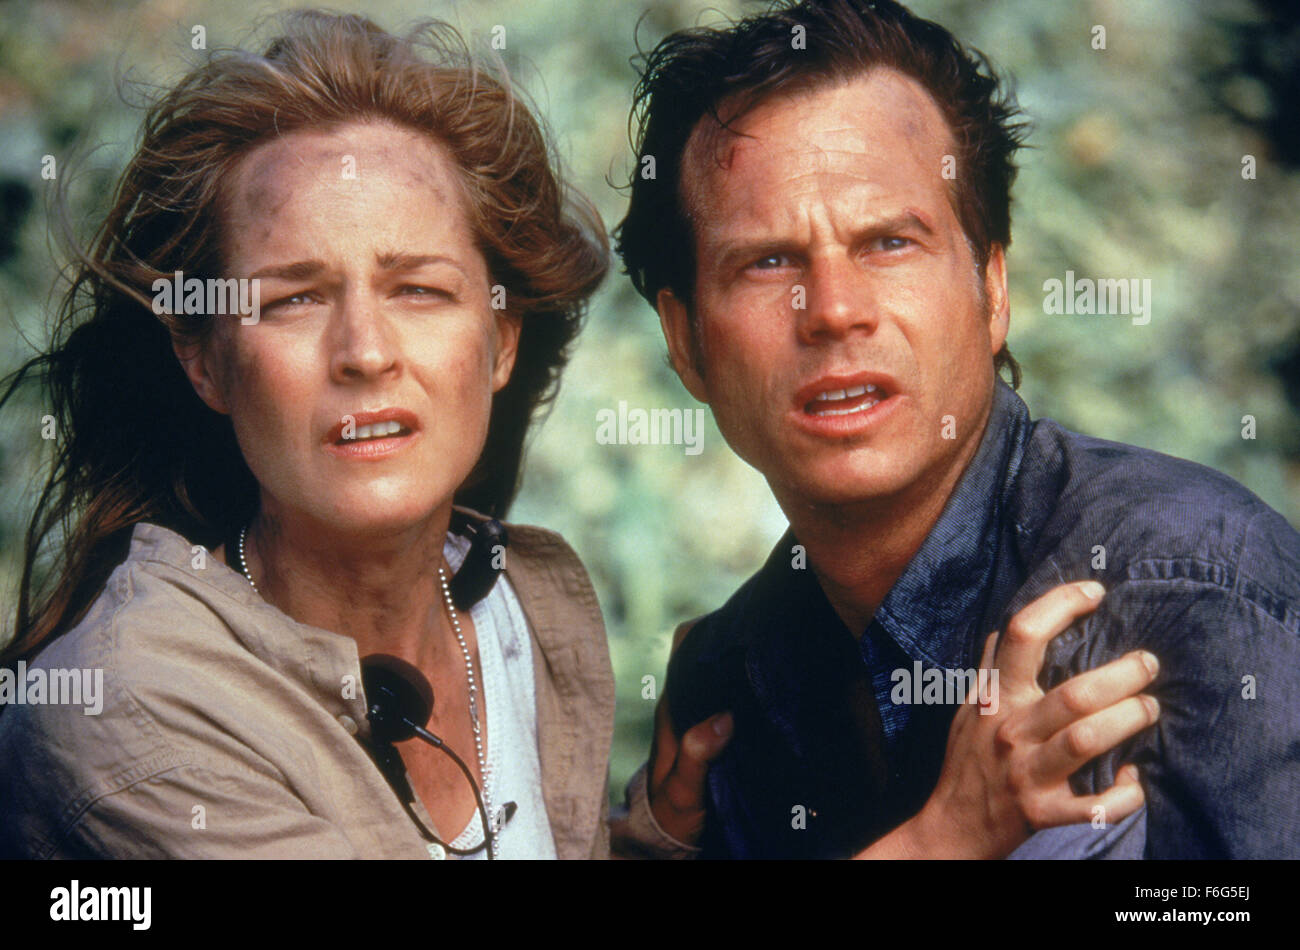 RELEASE DATE: 10 May 1996. MOVIE TITLE: Twister STUDIO: Universal Pictures. PLOT: A couple on the point of divorce keep meeting each other because both are researchers who chase tornadoes. PICTURED: HELEN HUNT as Dr. Jo Harding and BILL PAXTON as Bill Harding. Stock Photo